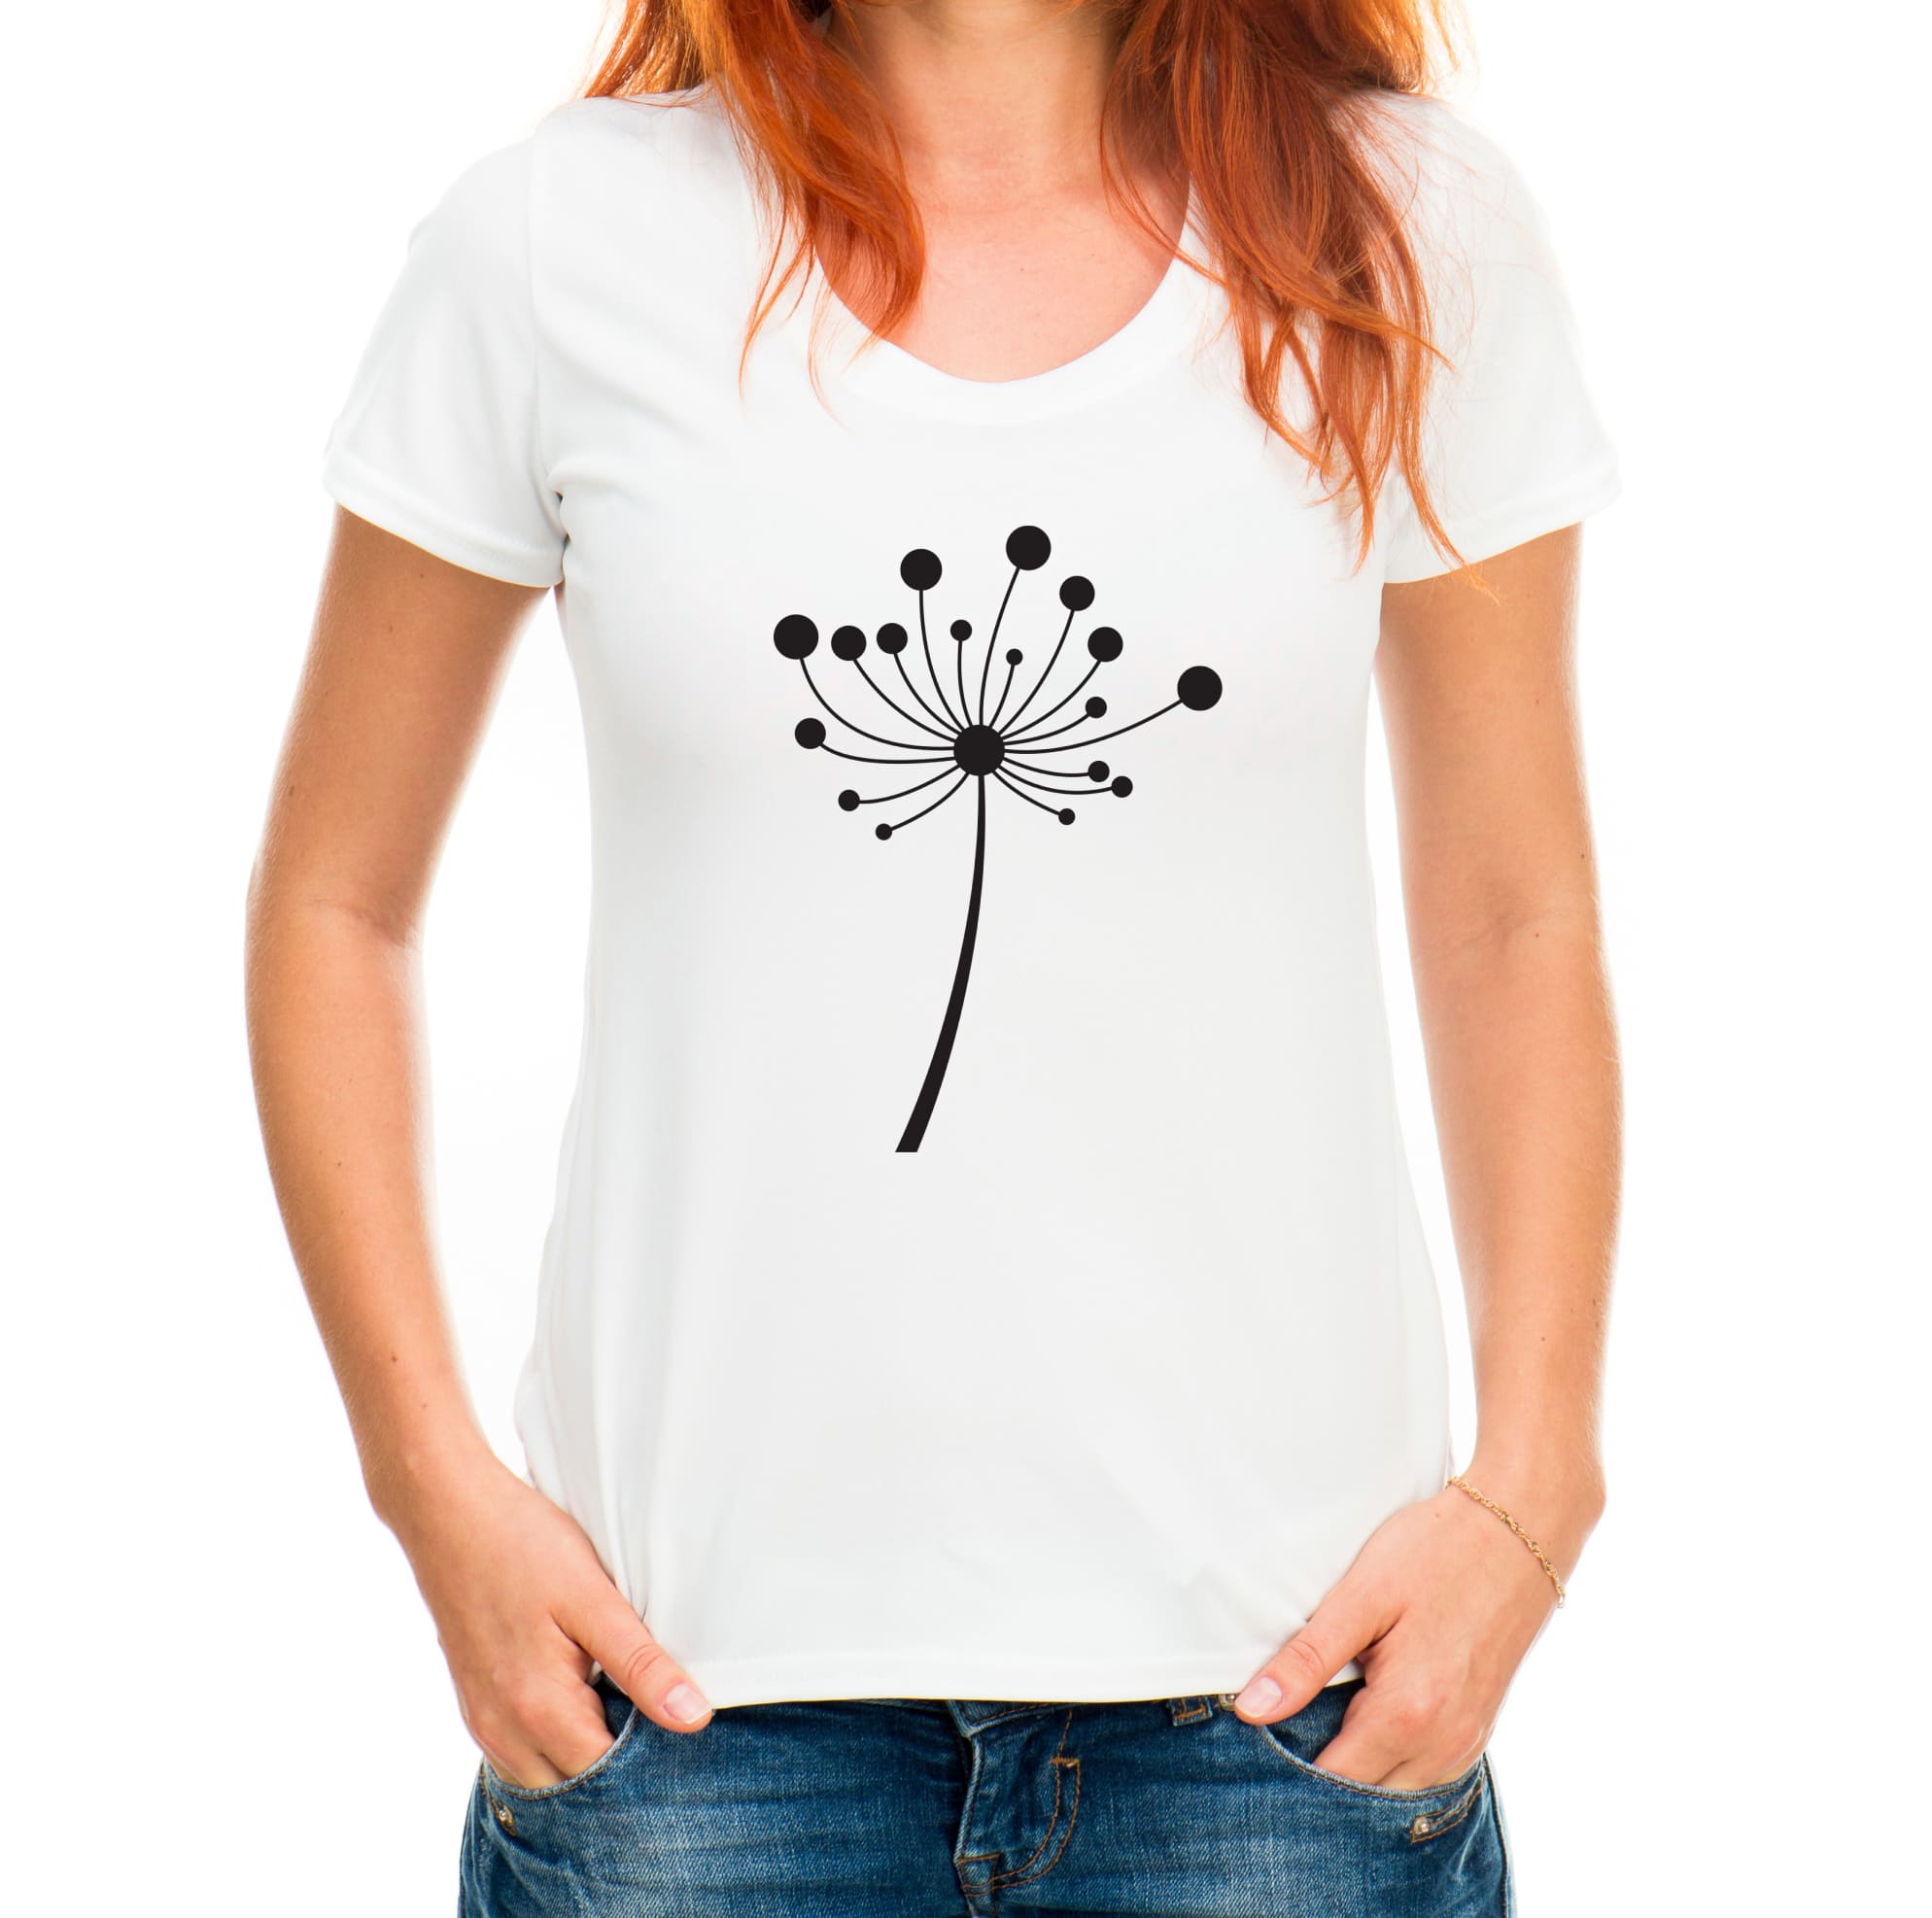 T-shirt image with irresistible dandelion print.